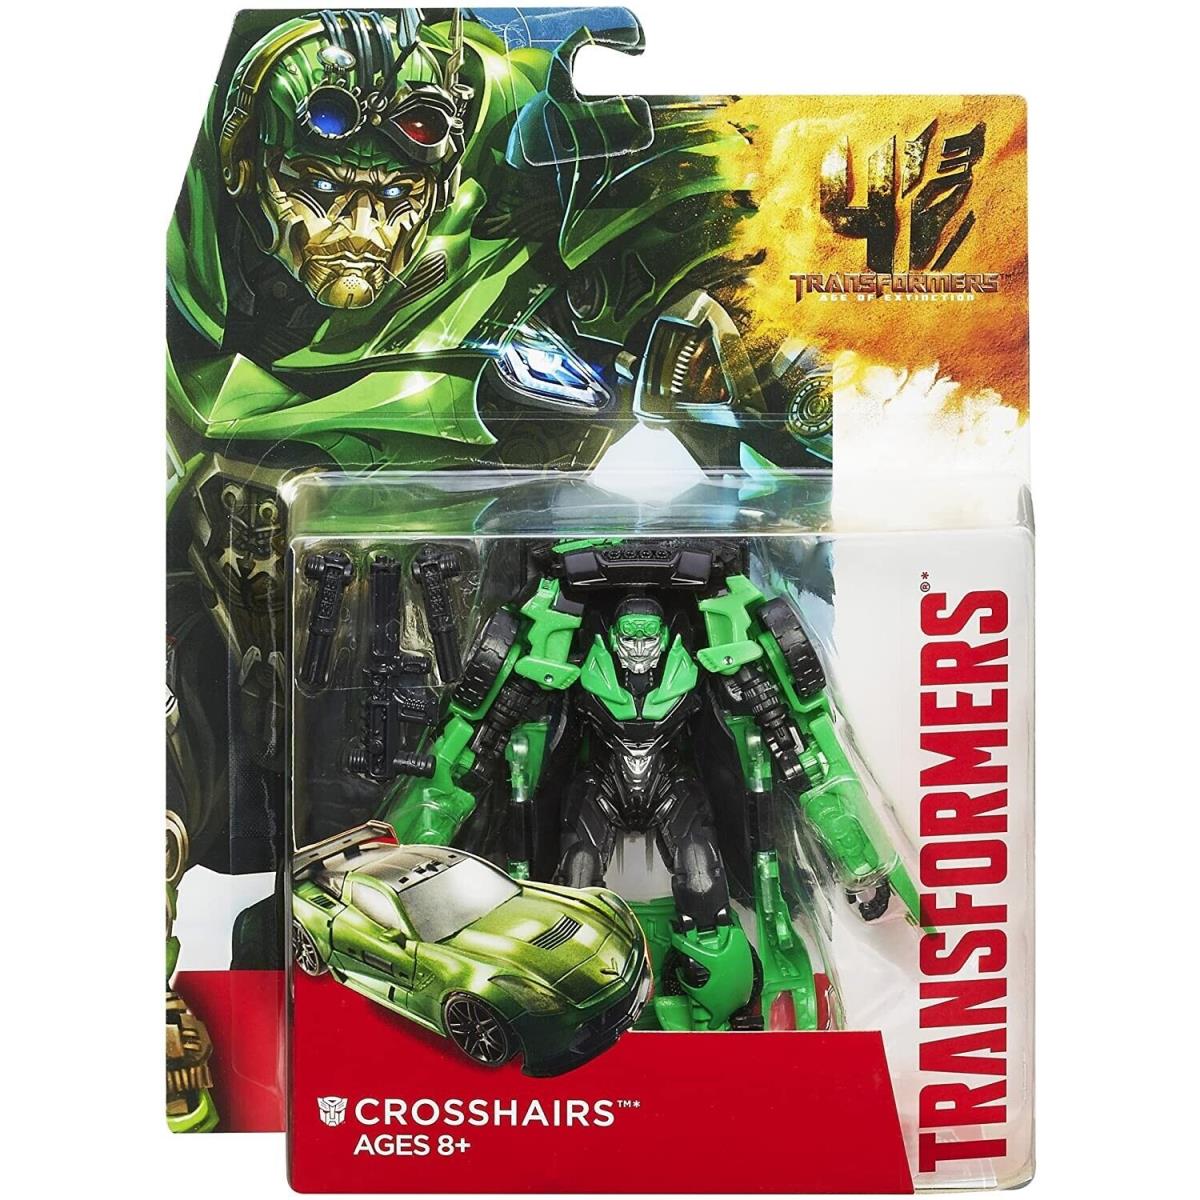 Crosshairs Transformers 2014 Age of Extinction Deluxe Class Action Figure